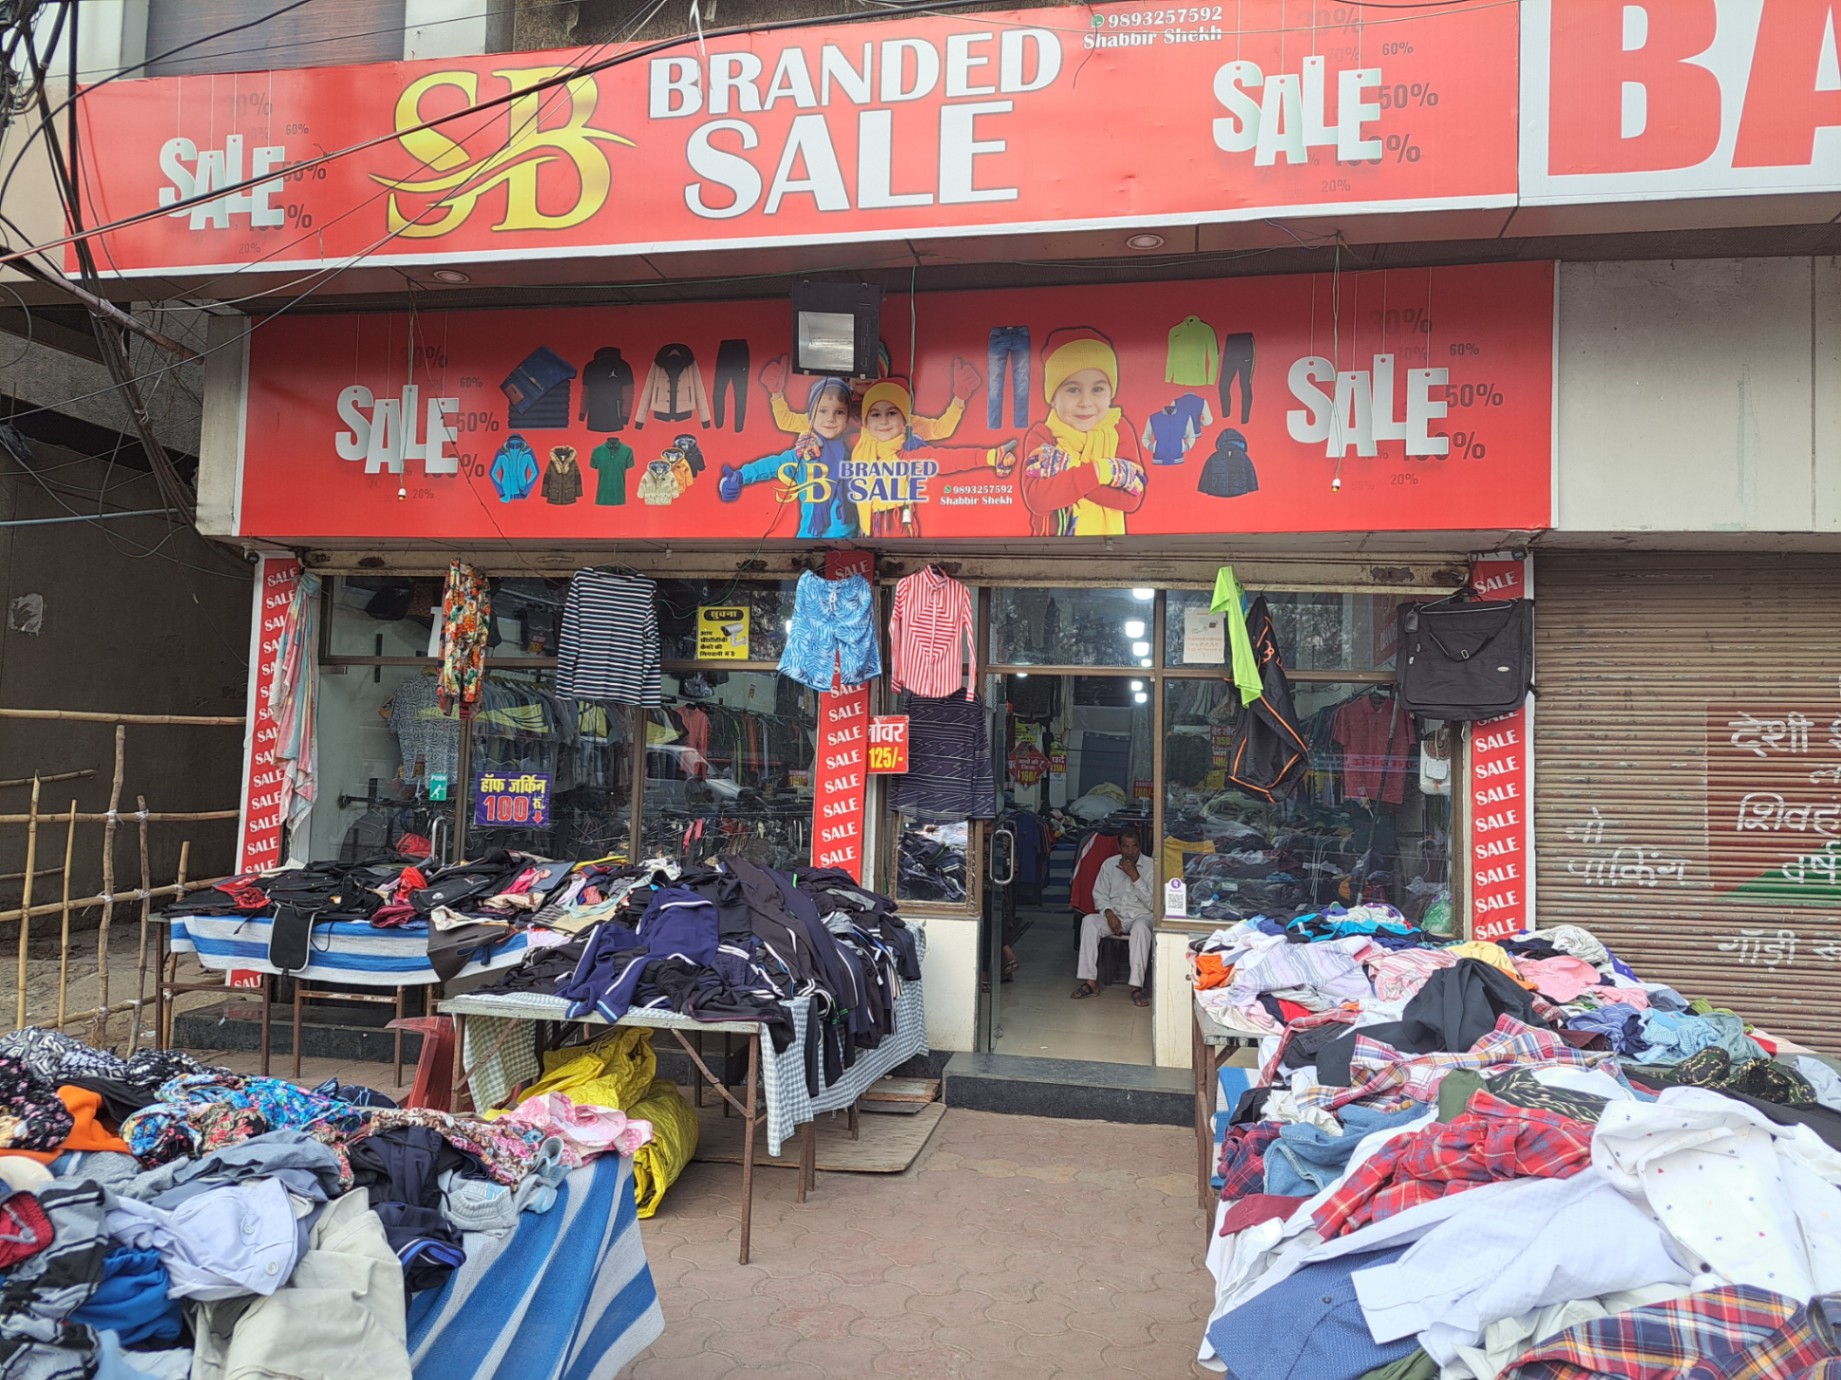 New Deal - Upto 10% Off @Branded Sale Hamidia Road, Bhopal